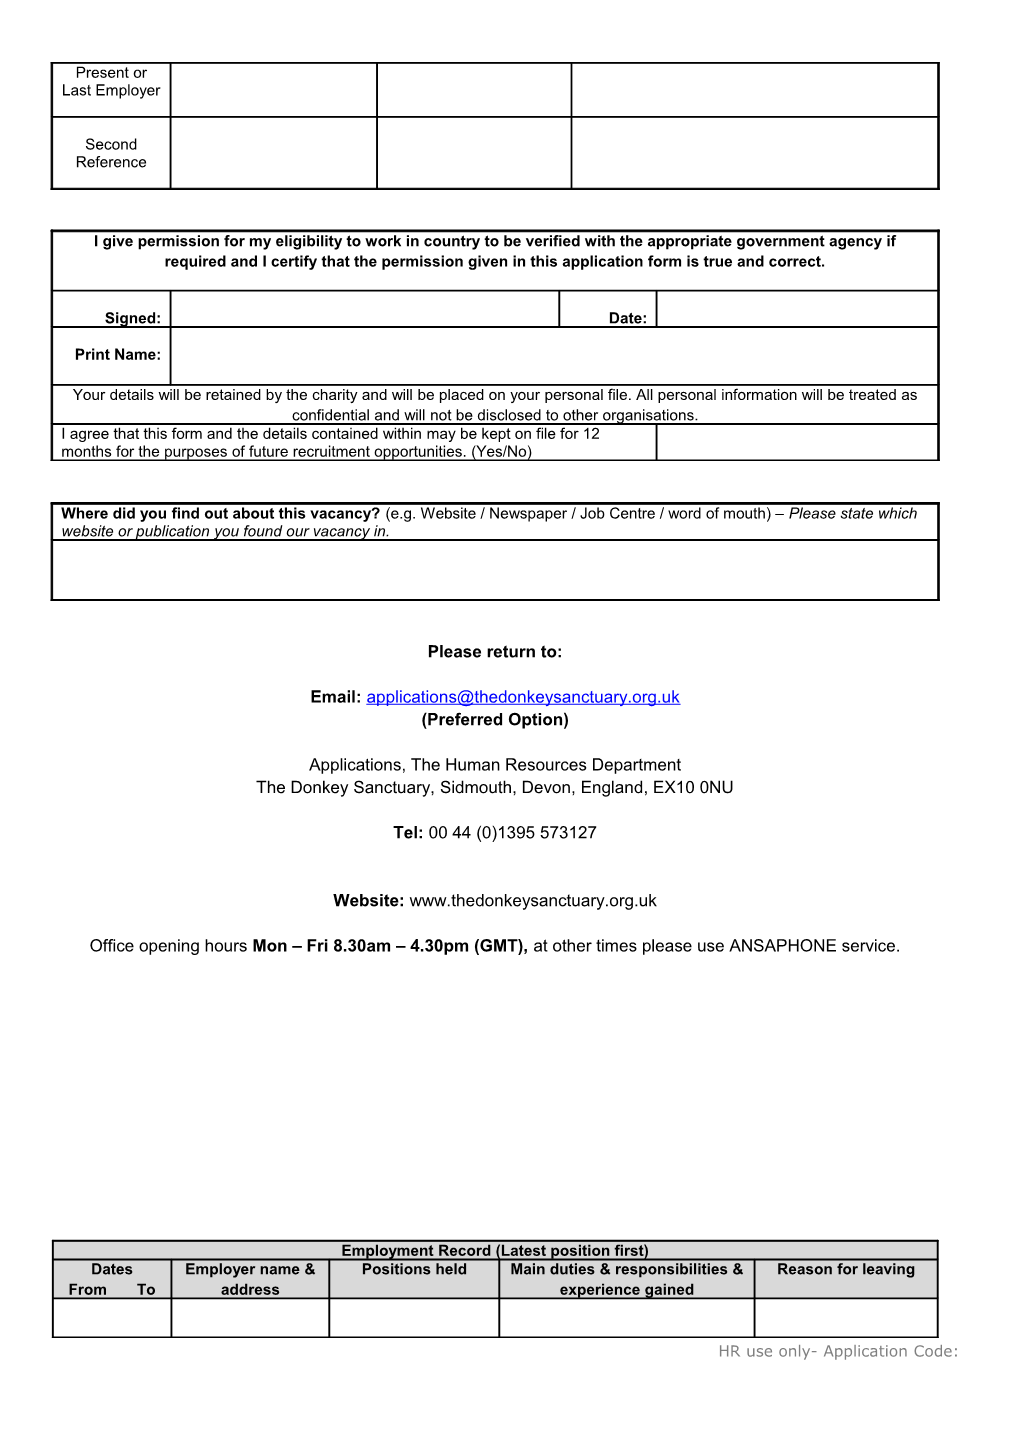 Application Form Guidance Note s2